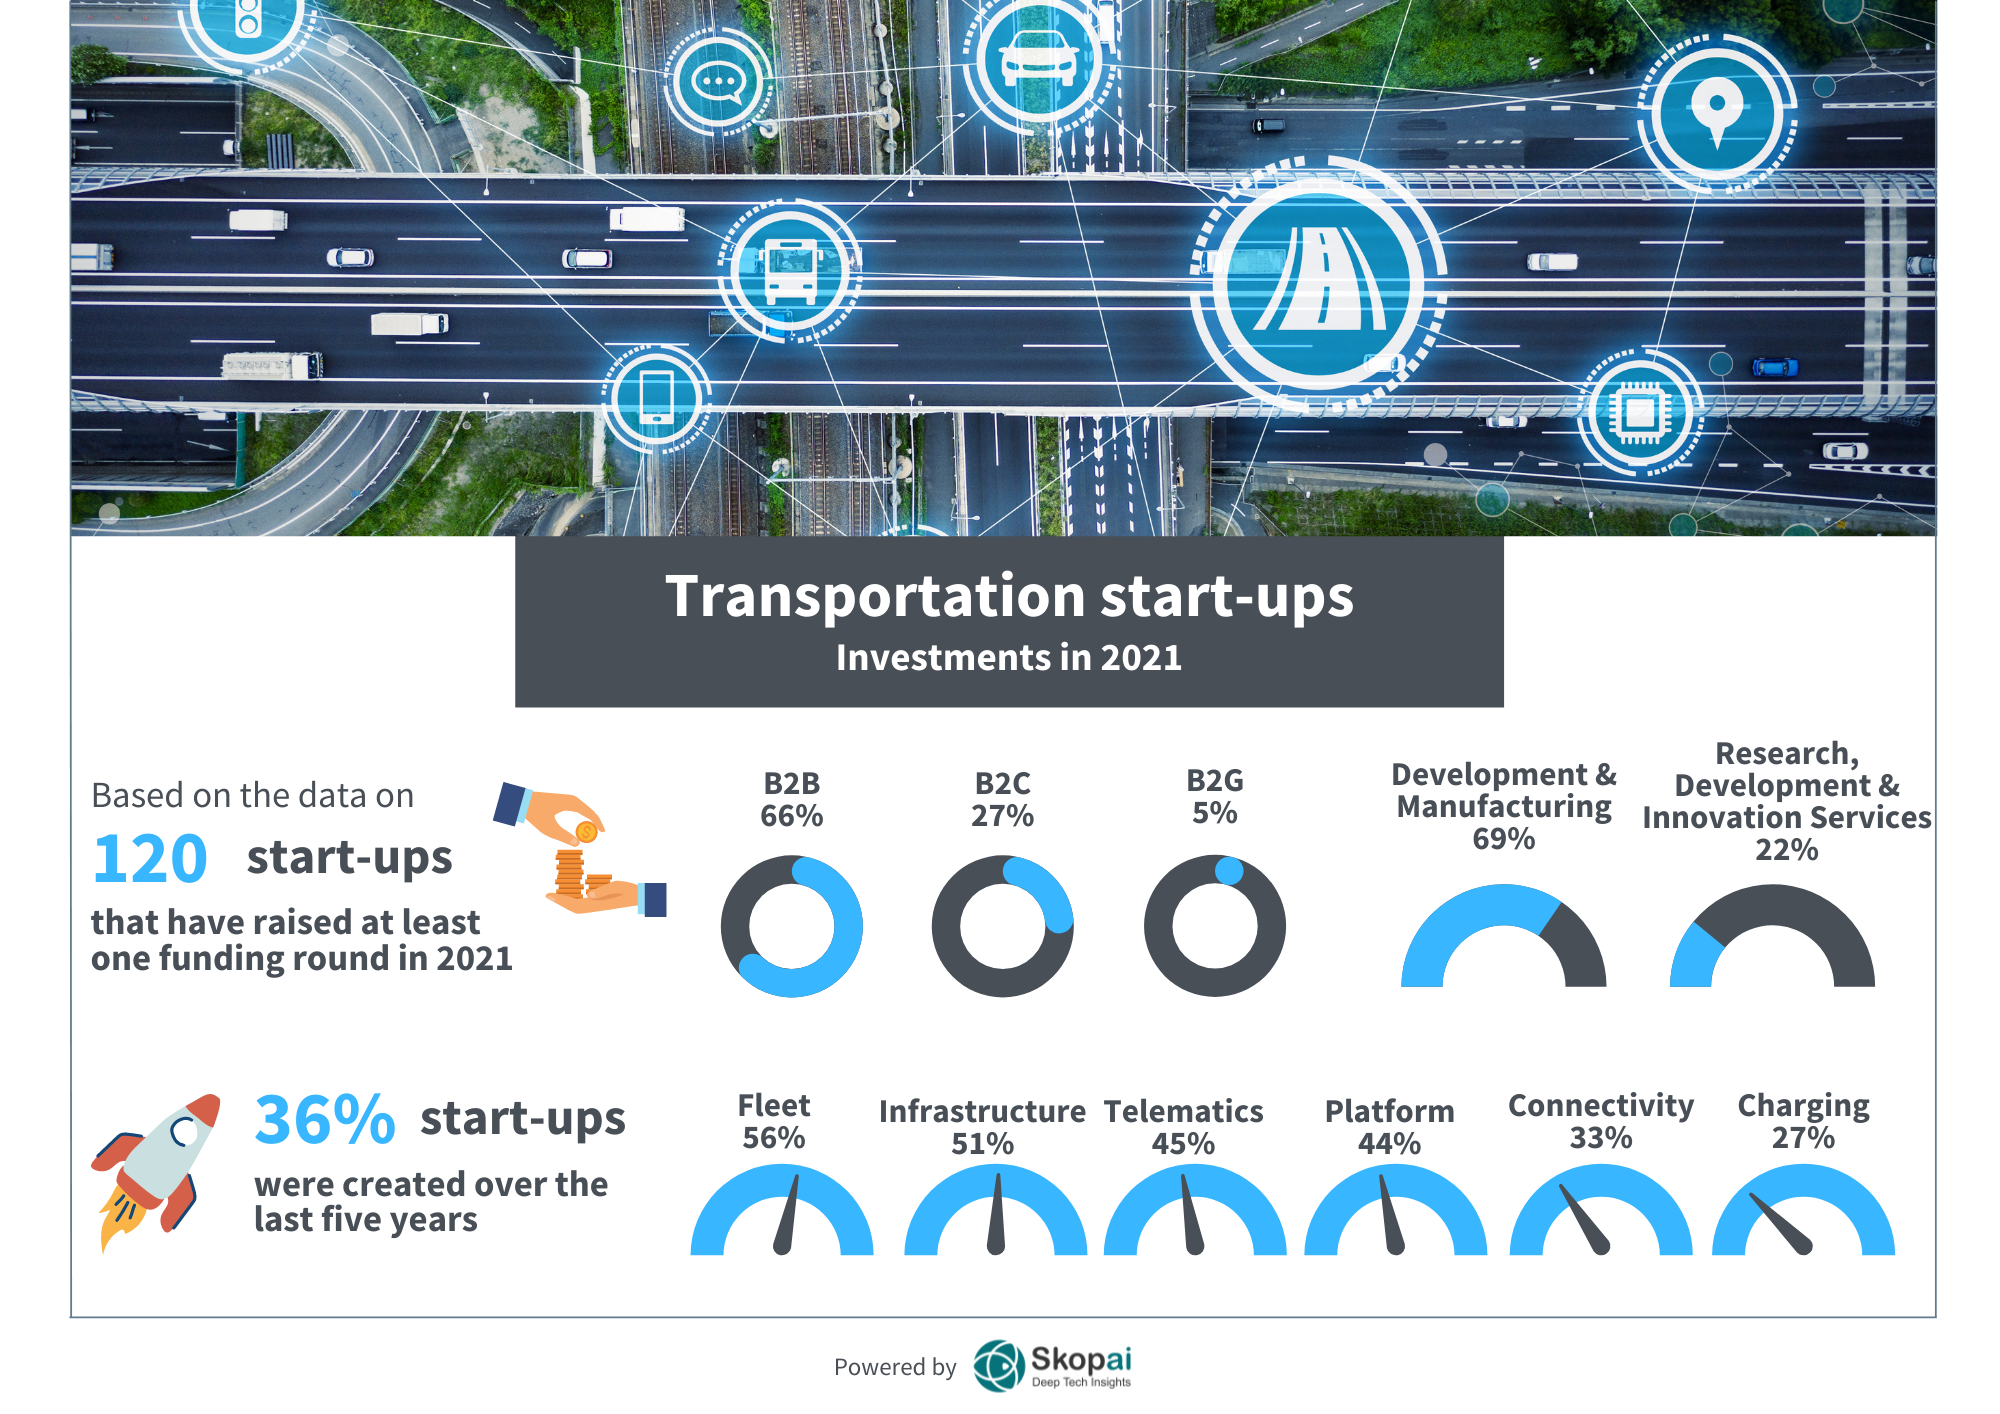 Investments in transportation start-ups in 2021